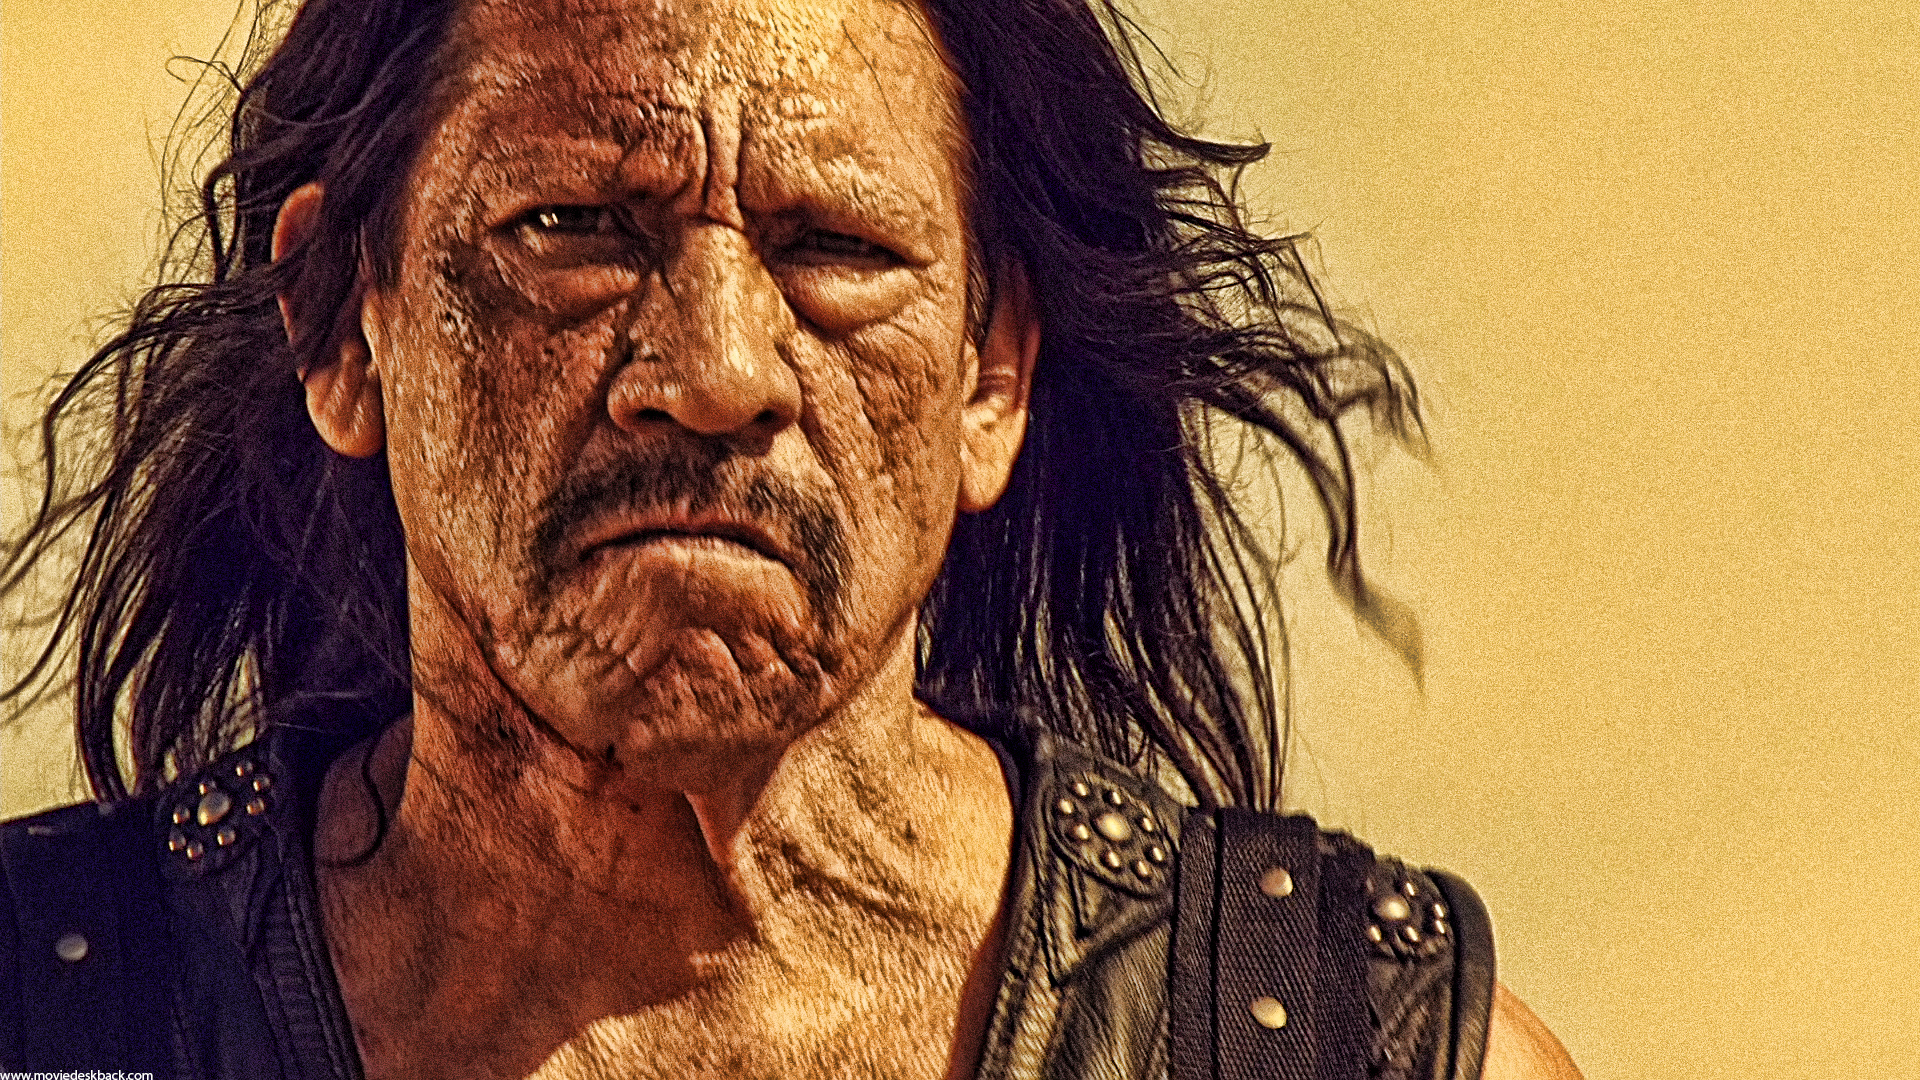 #73 - Main news thread - conflicts, terrorism, crisis from around the globe - Page 18 Danny-trejo